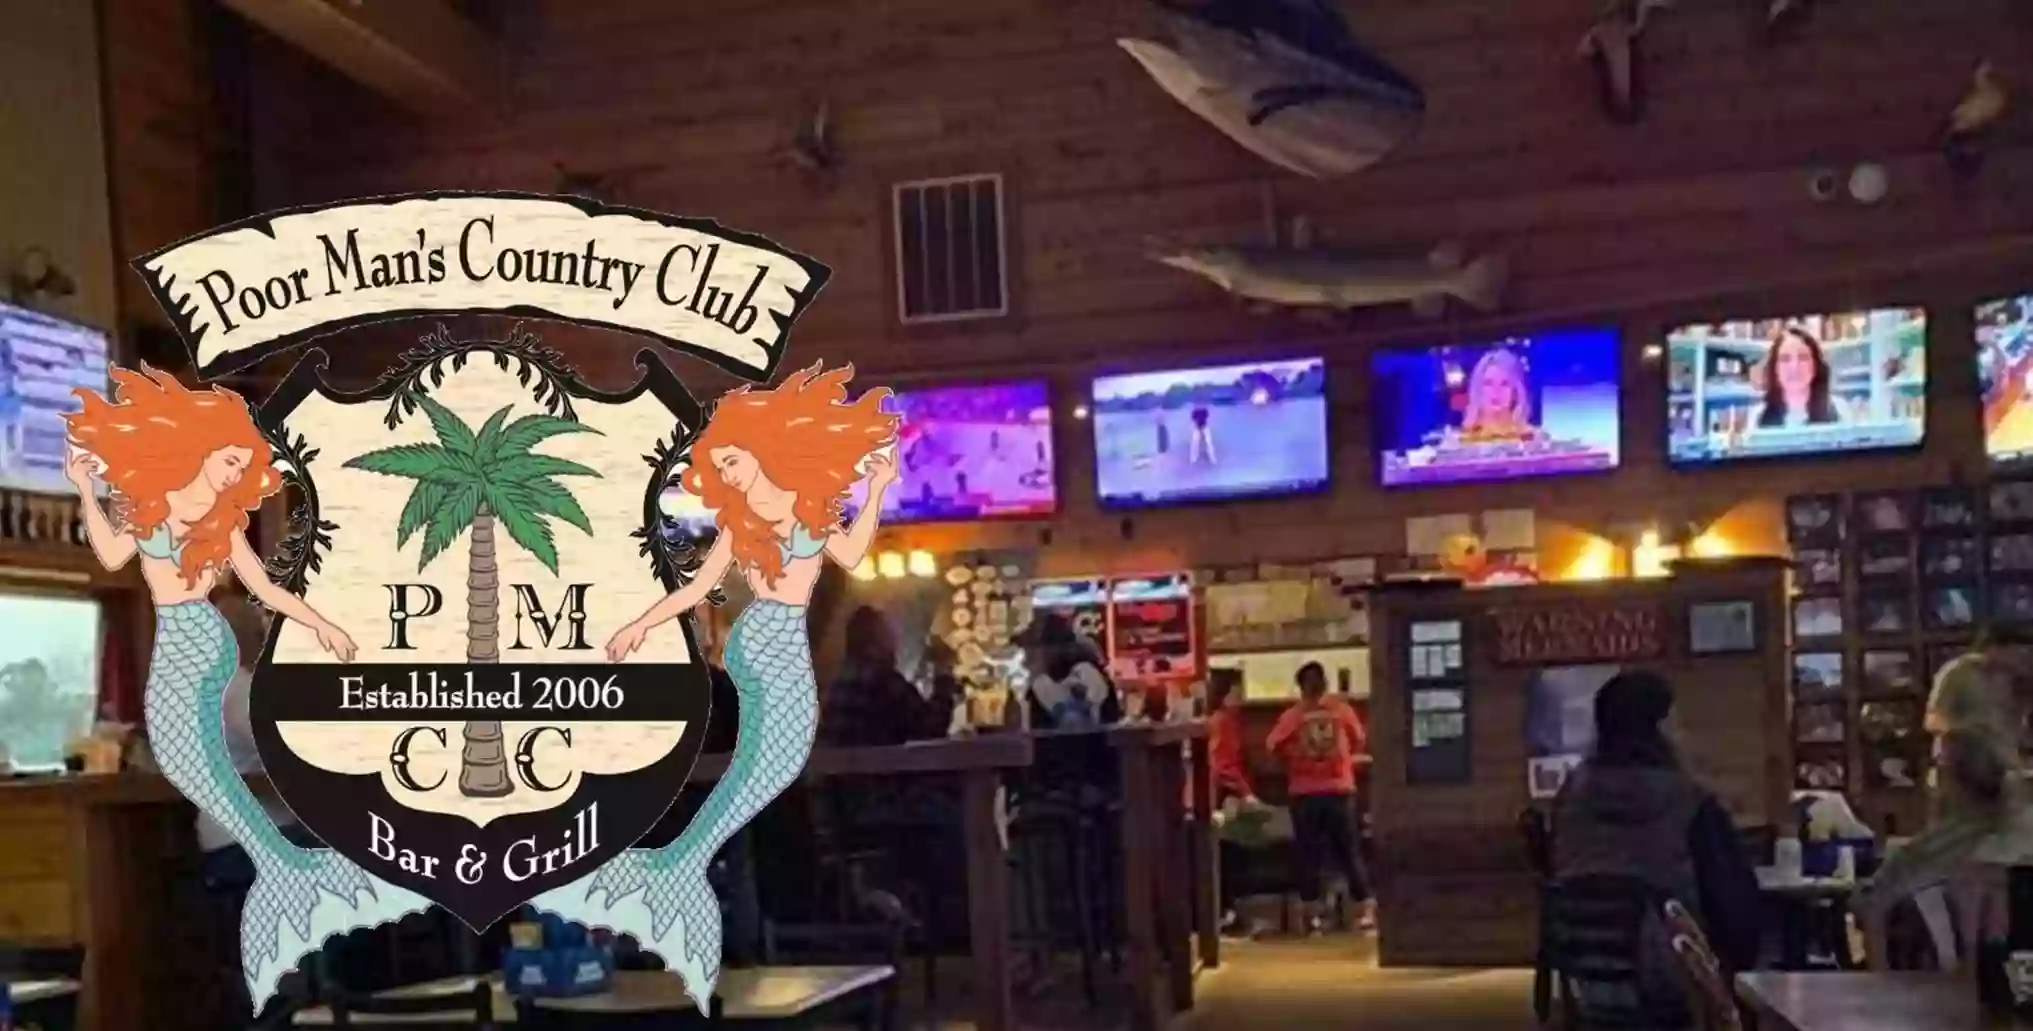 Poor Man's Country Club